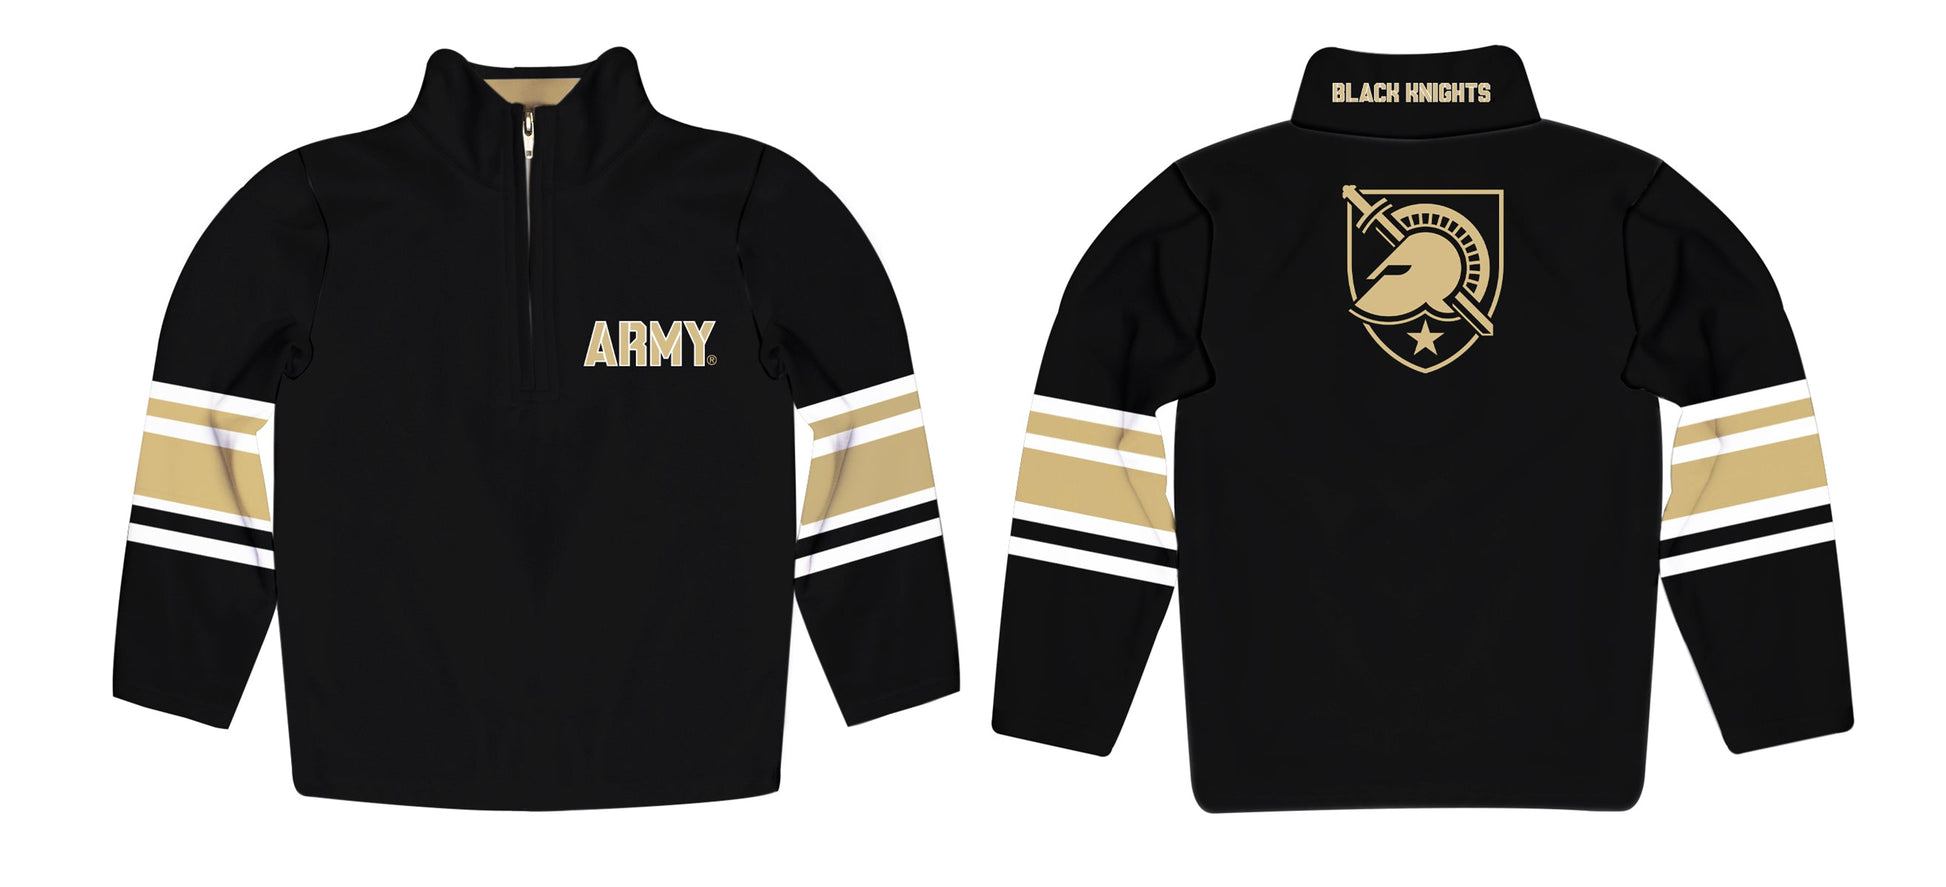 US Military ARMY Black Knights Game Day Black Quarter Zip Pullover for Infants Toddlers by Vive La Fete